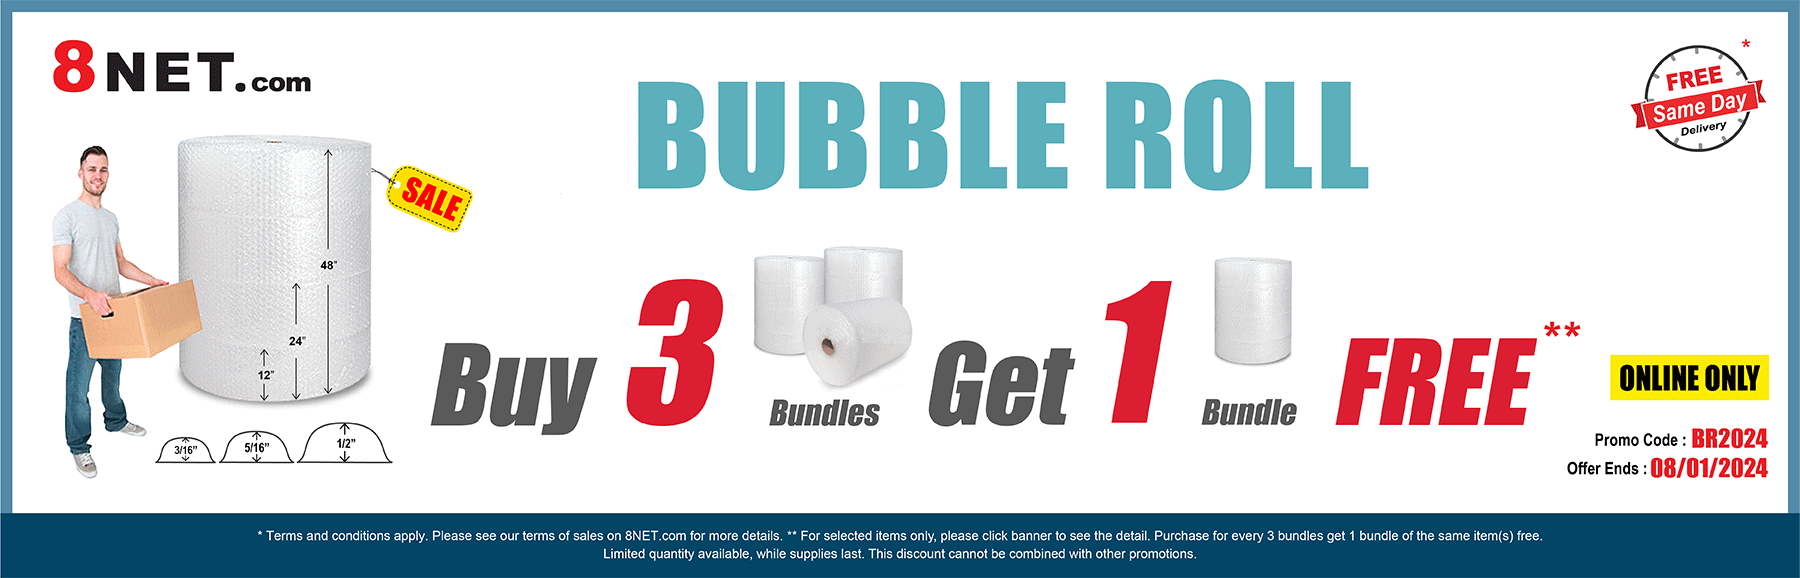 https://www.8net.com/shipping-supply/shipping-supply-bubble/bubble-roll-test.html